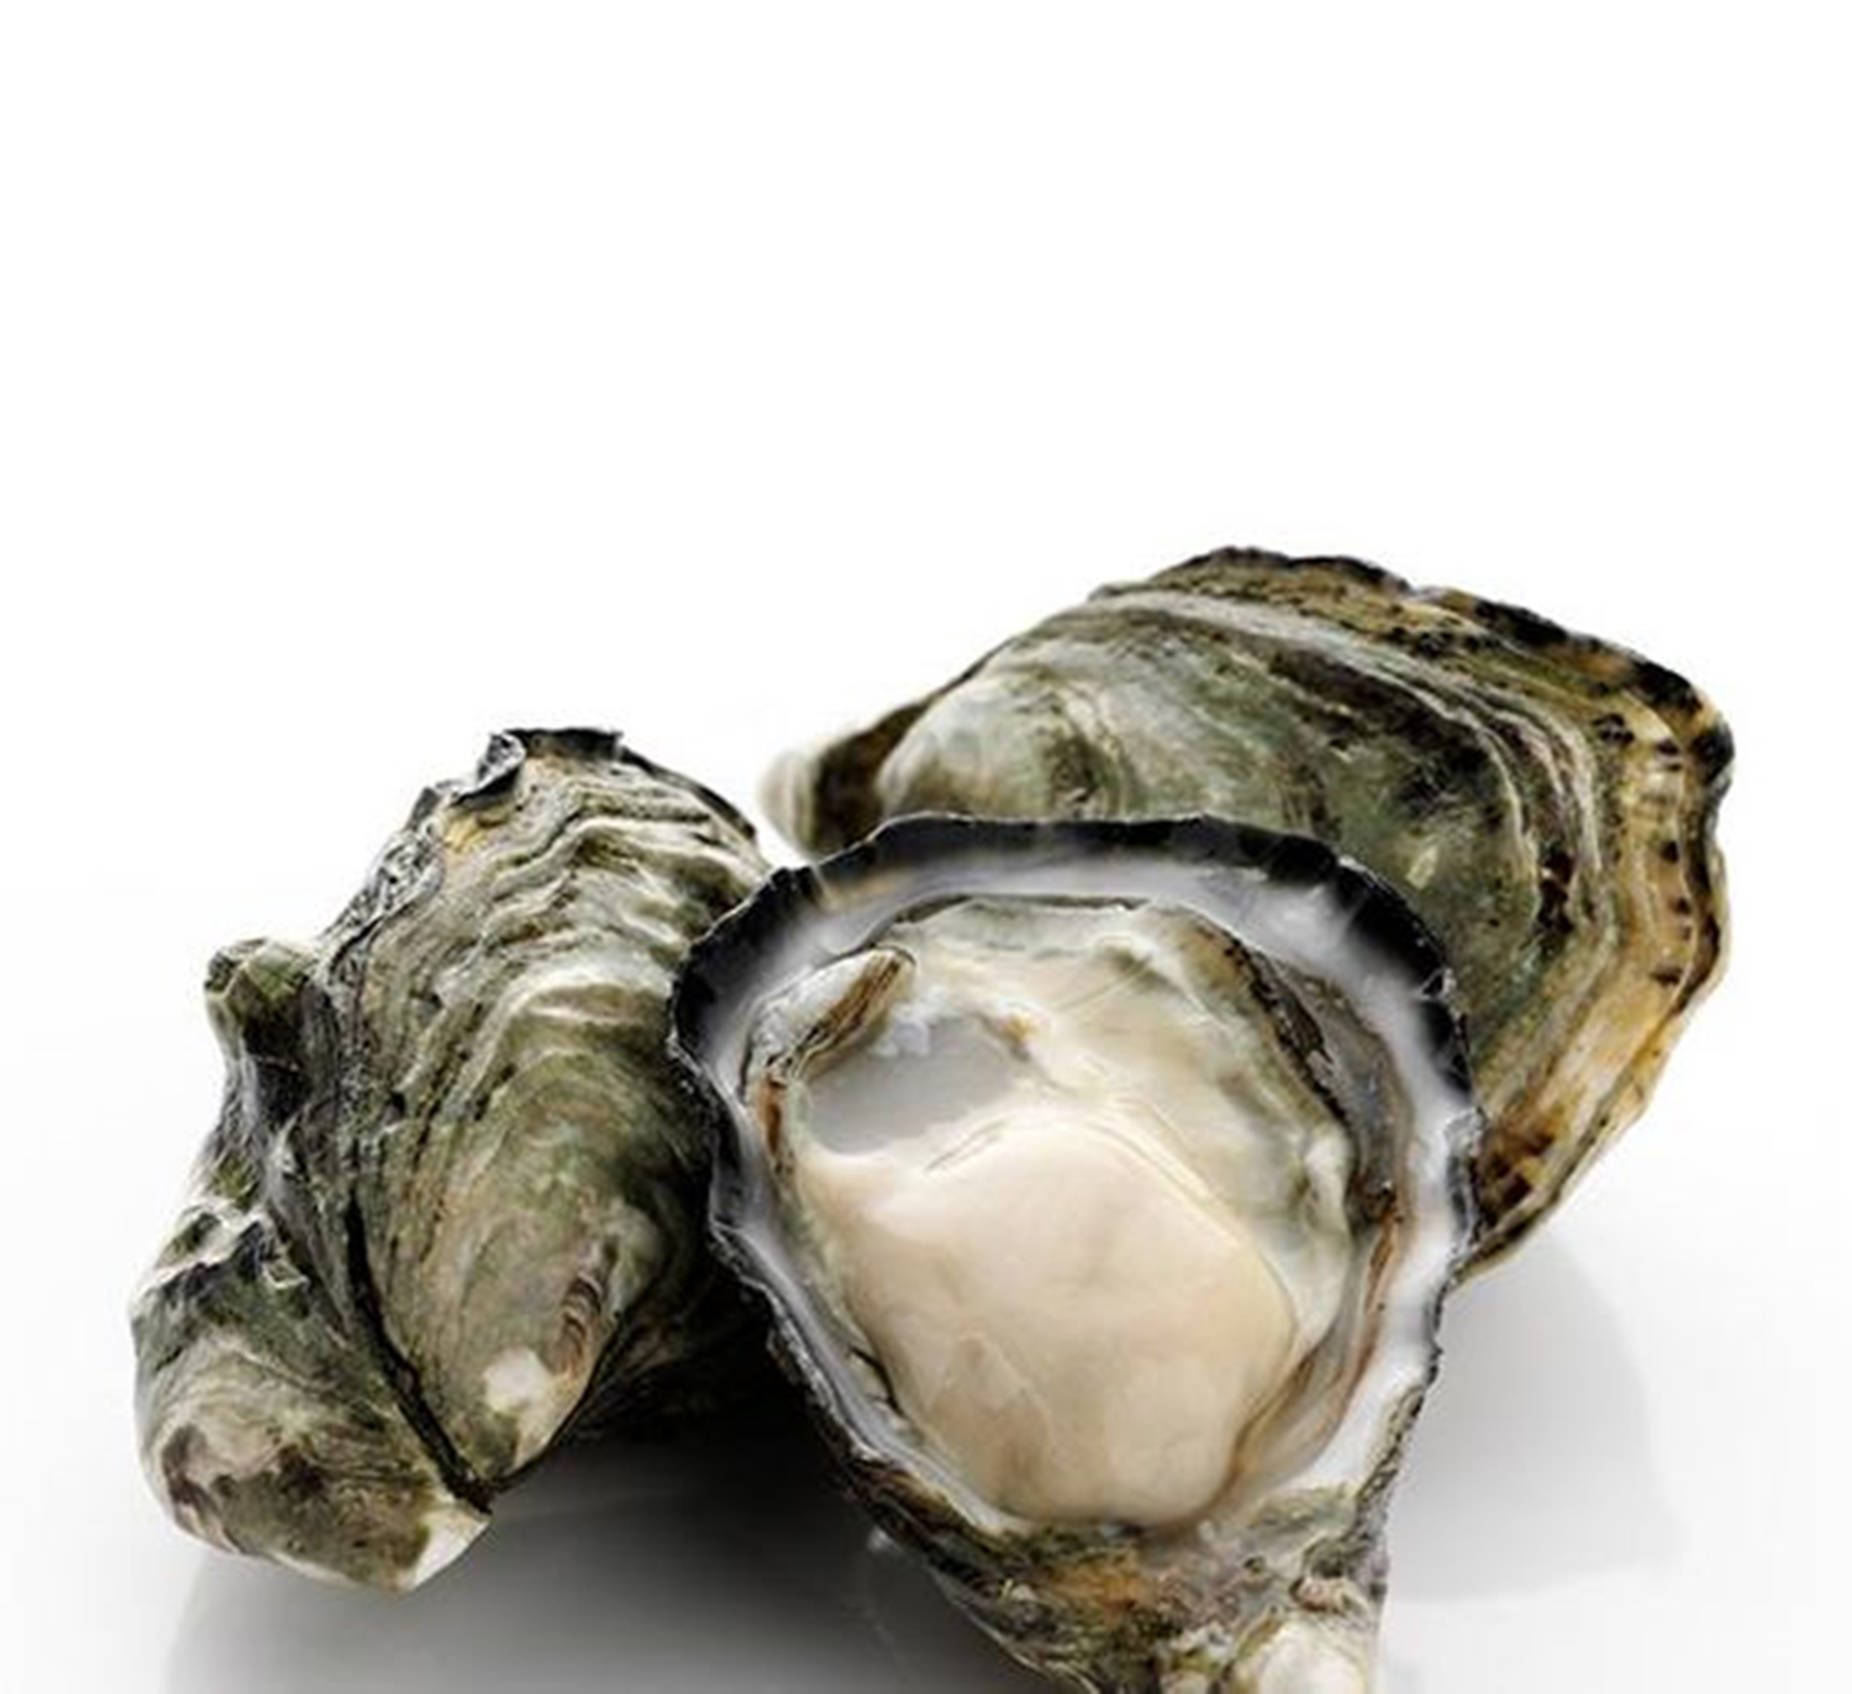 Seafood Oyster With Big Shells Wallpaper